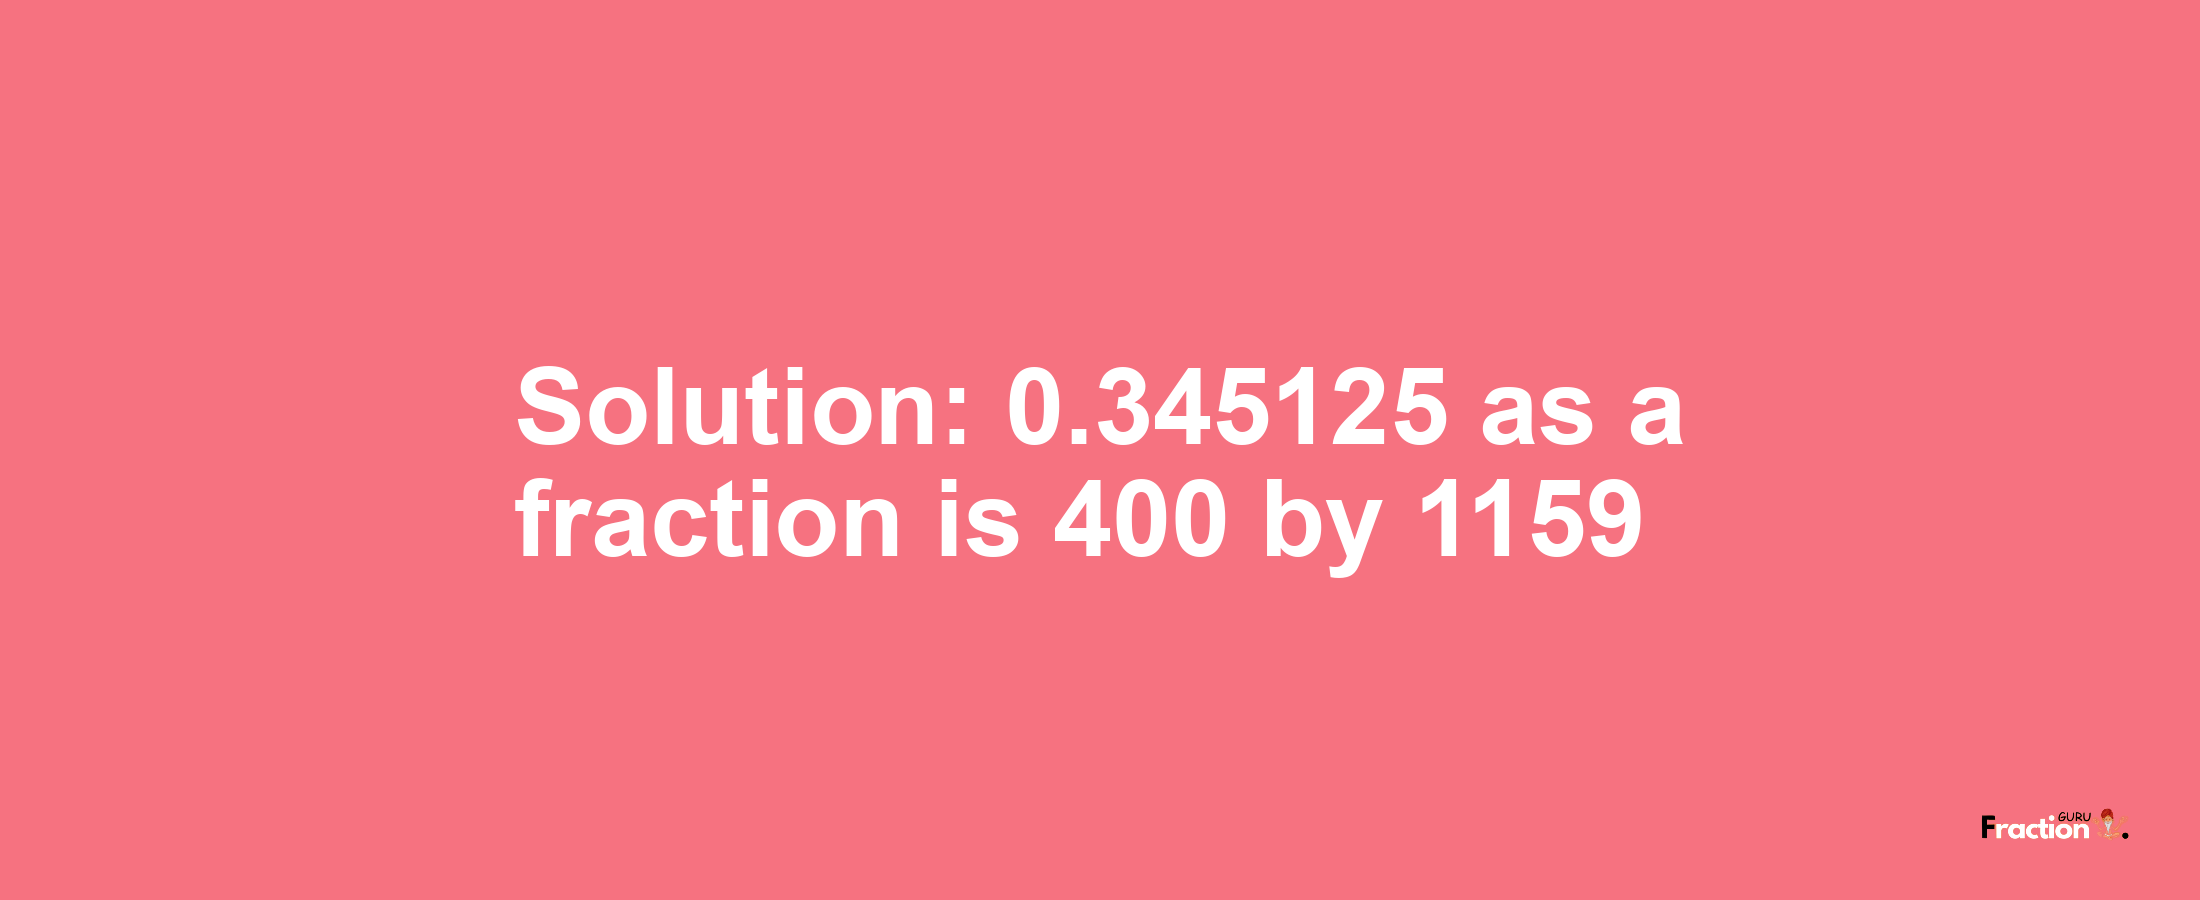 Solution:0.345125 as a fraction is 400/1159